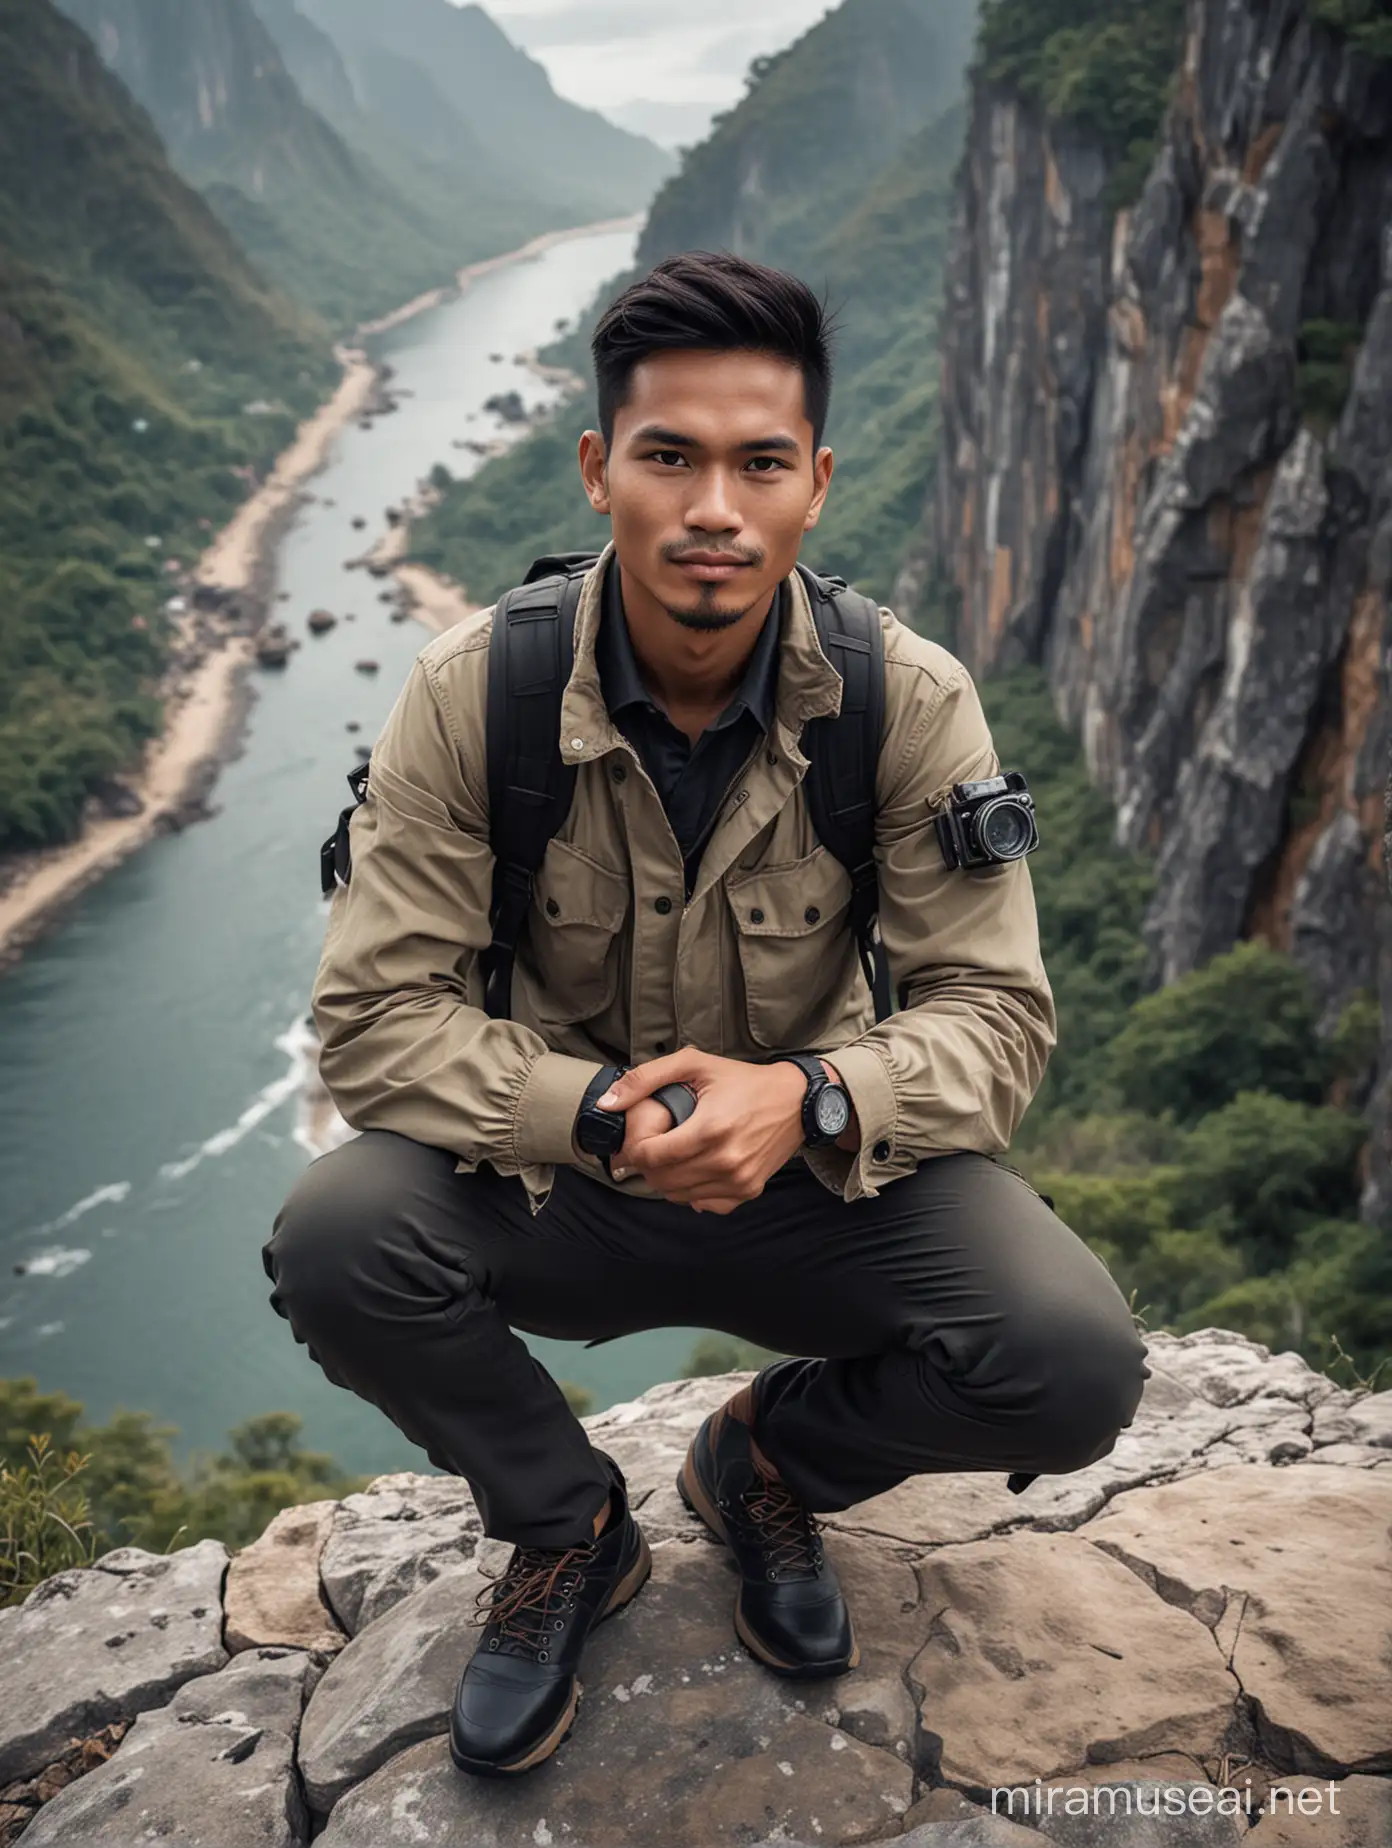 25 year old Indonesian man in adventure clothes, black trousers and watch and holding a camera, sitting on a cliff with a beautiful view, face facing forward, faint smile, realistic photo.